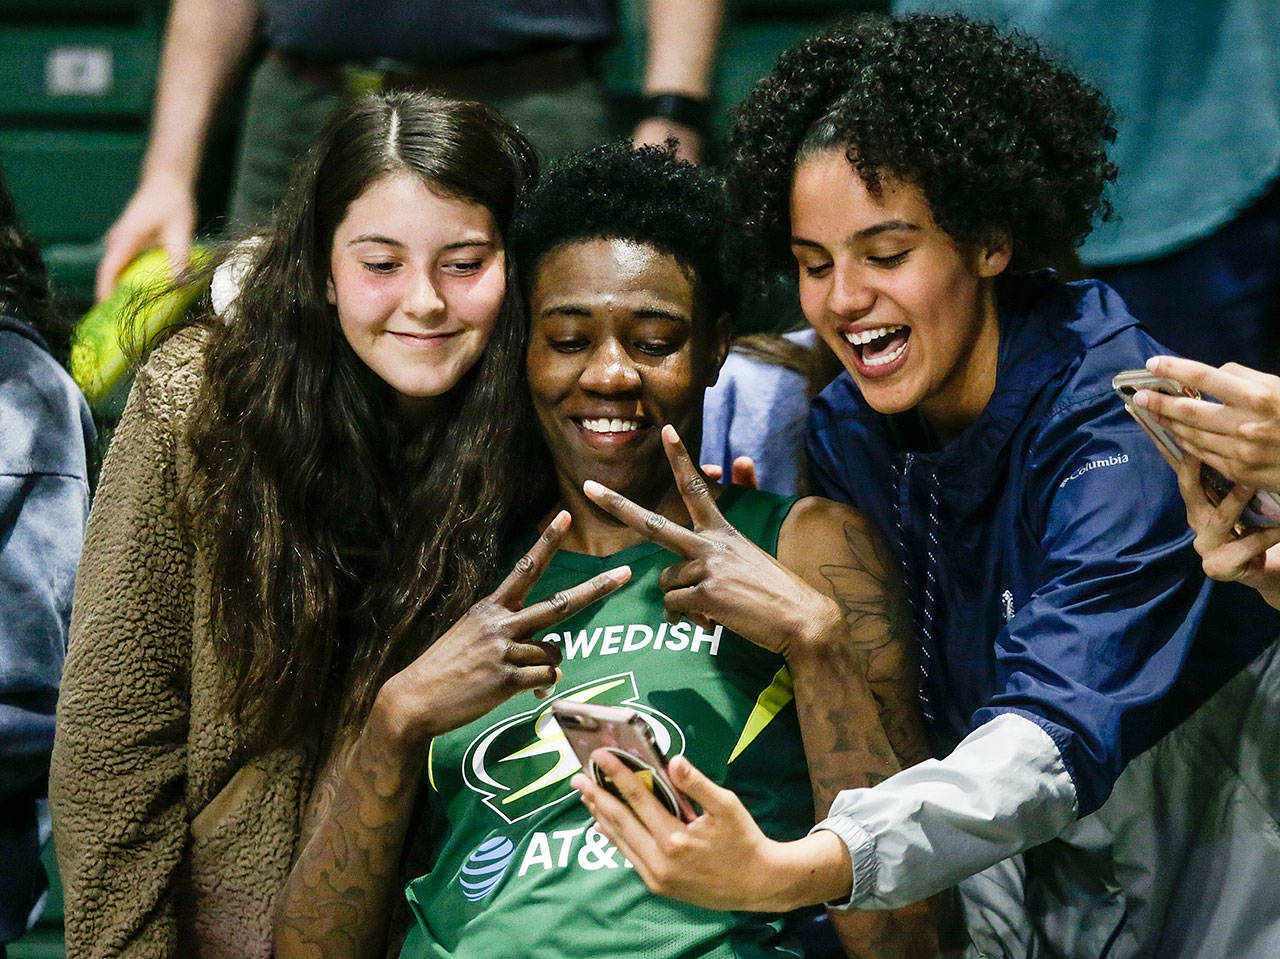 The Storm’s Natasha Howard poses for photos with fans after Seattle beat the Minnesota Lynx 84-77 on June 4 at the Angel of the Winds Arena in Everett. (Andy Bronson / The Herald)